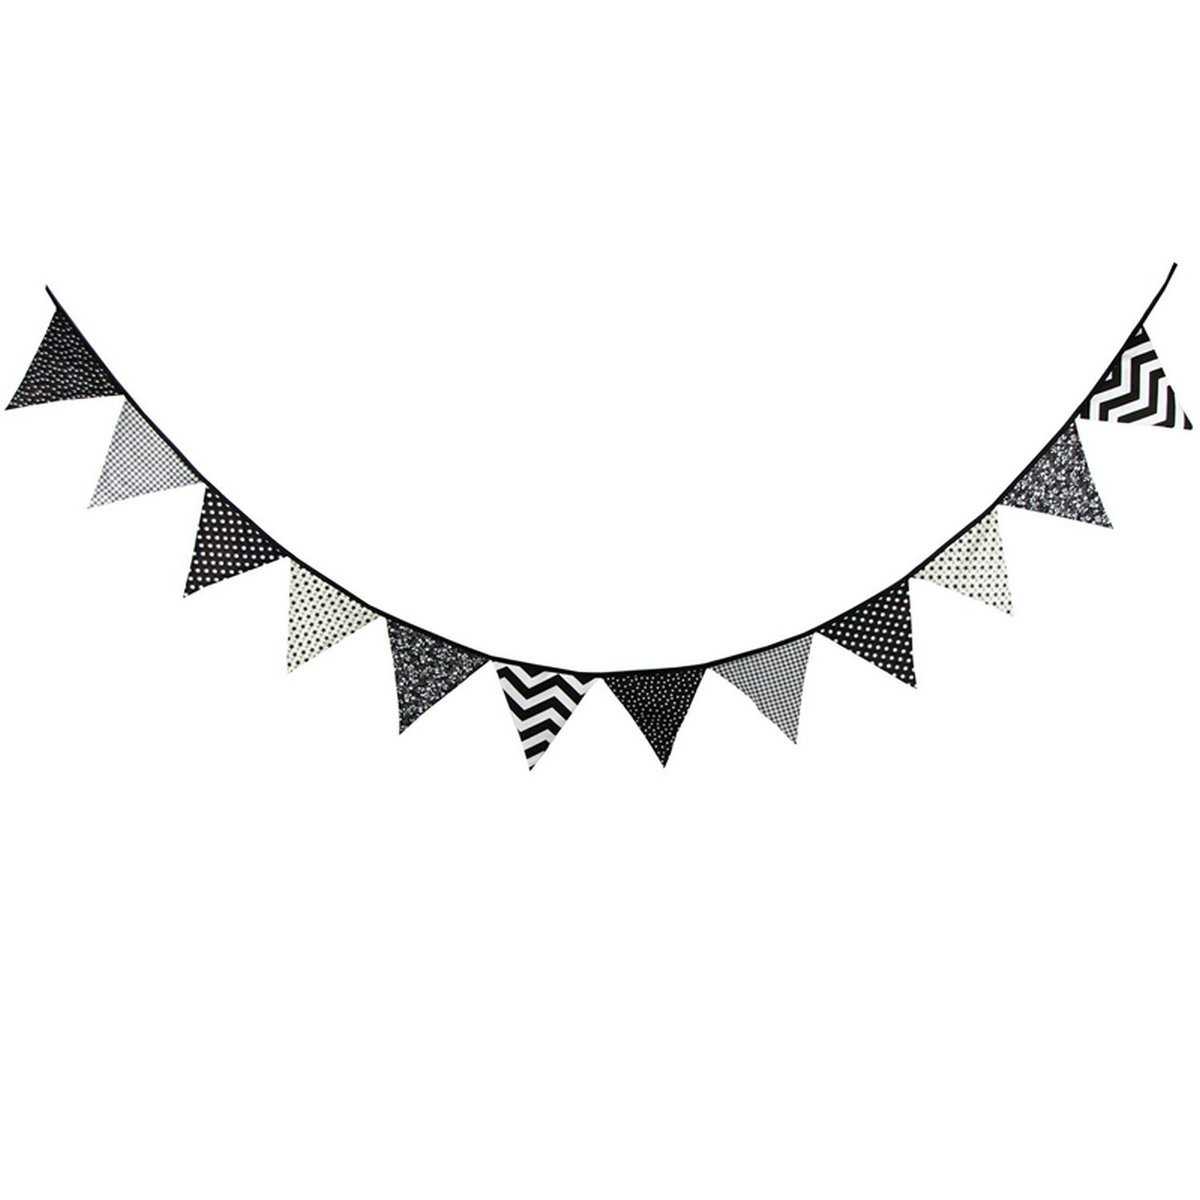 pennant clipart triangle banner